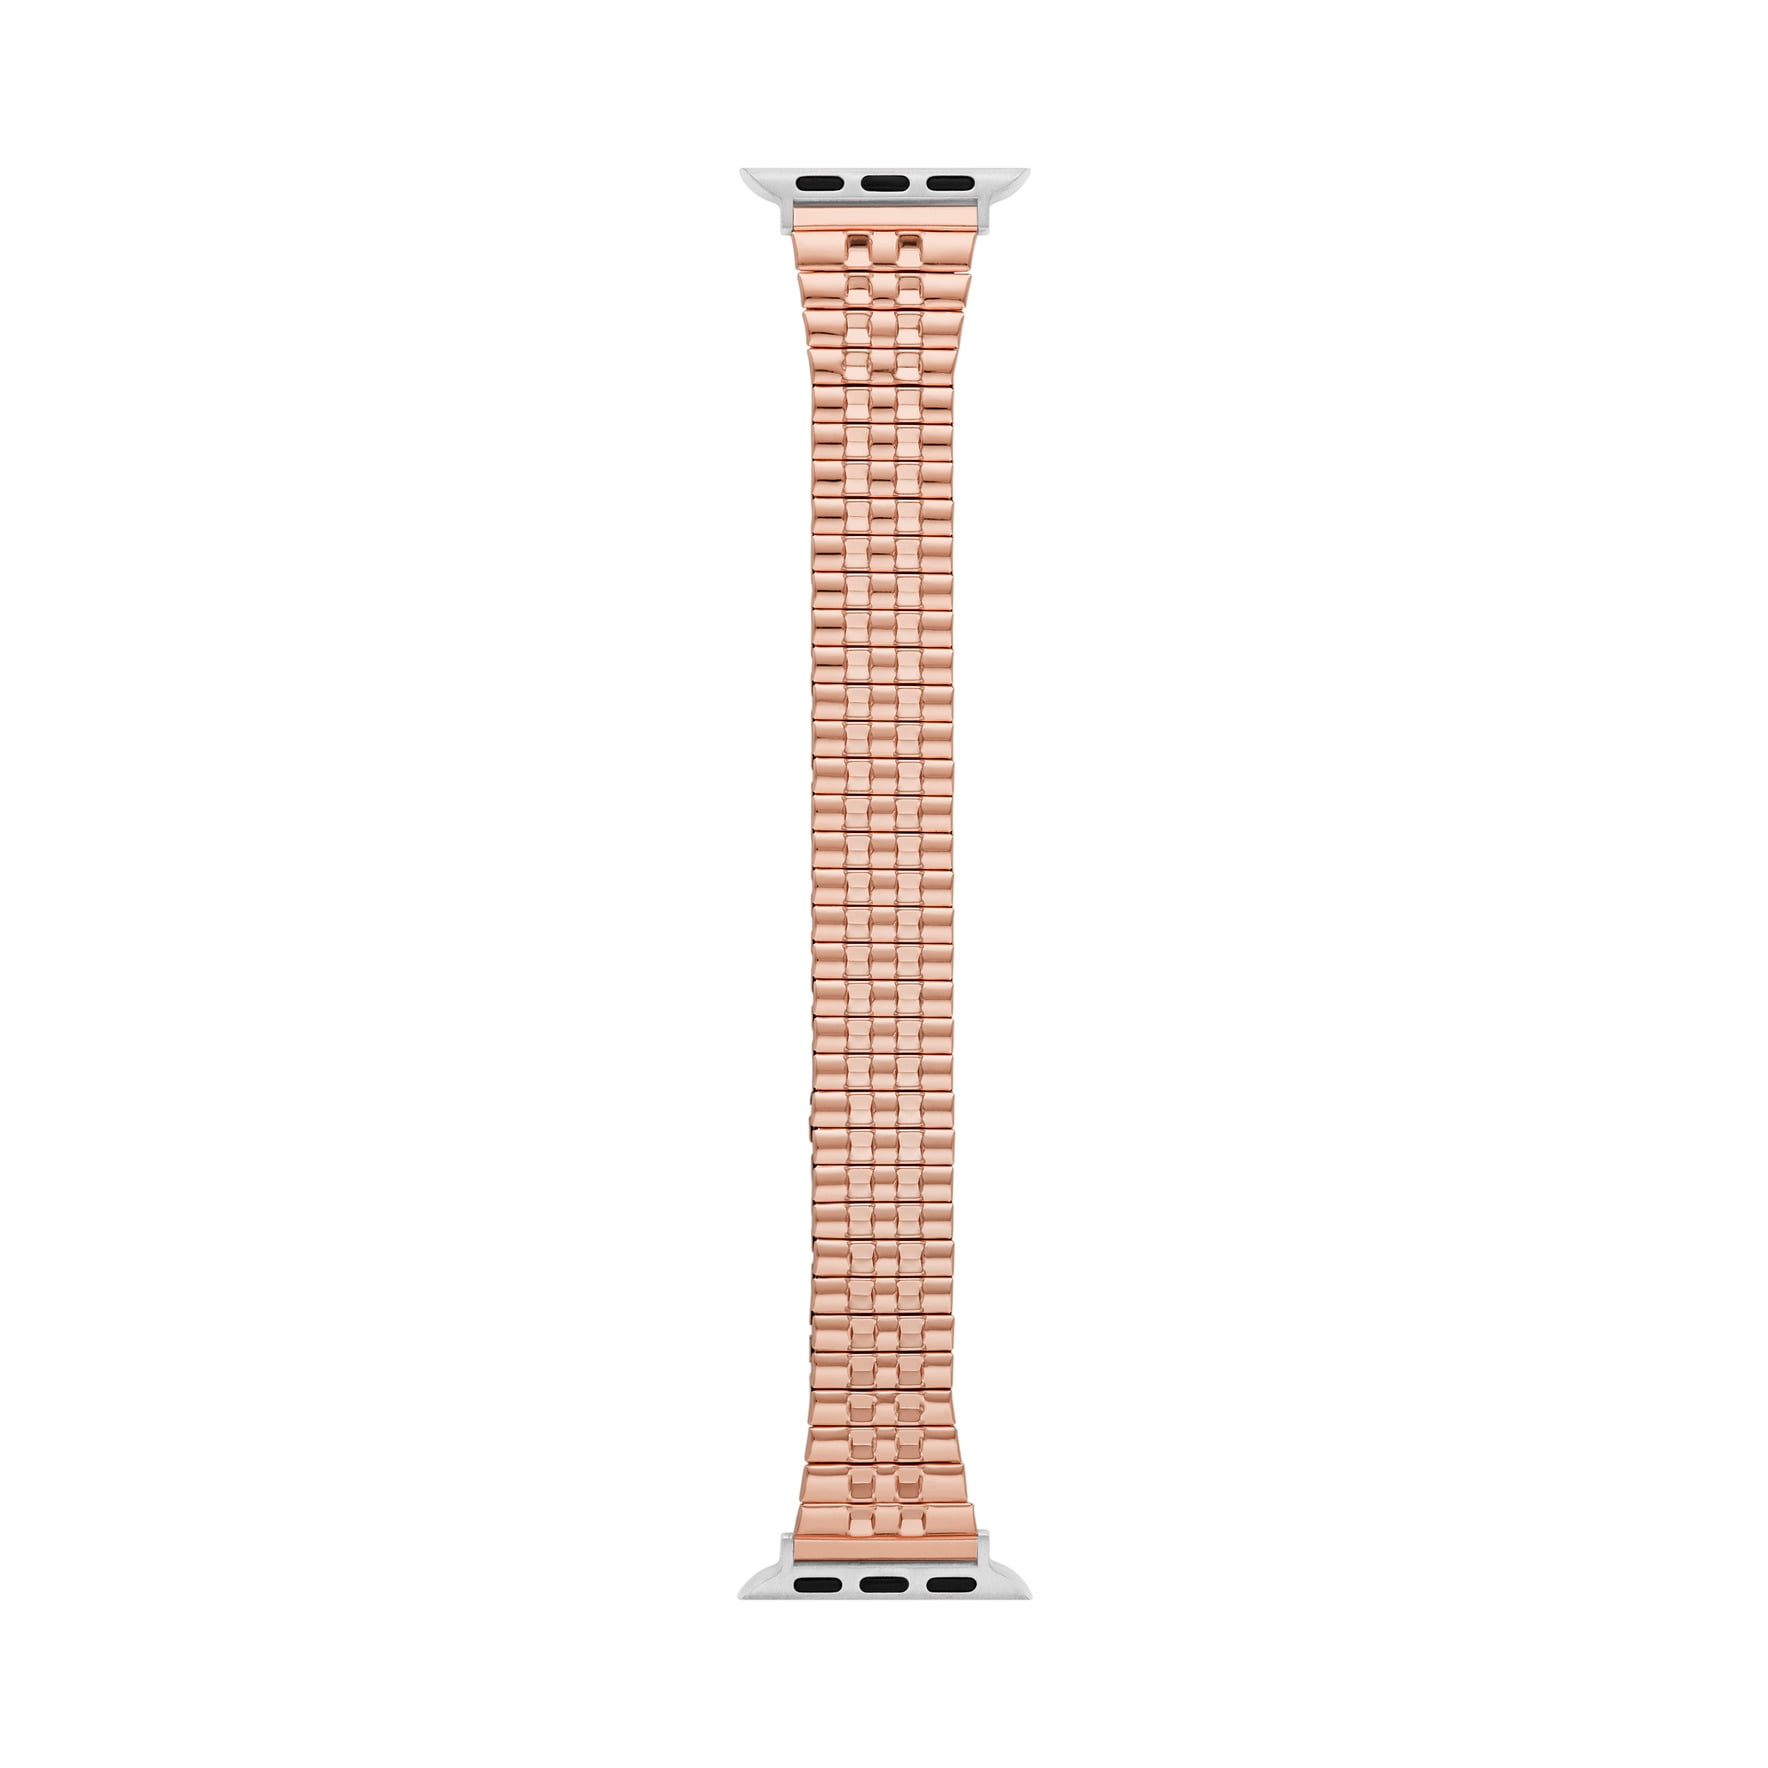 Interchangeable Rose Gold Expansion Watch Band (FMDBA042) 38/40mm